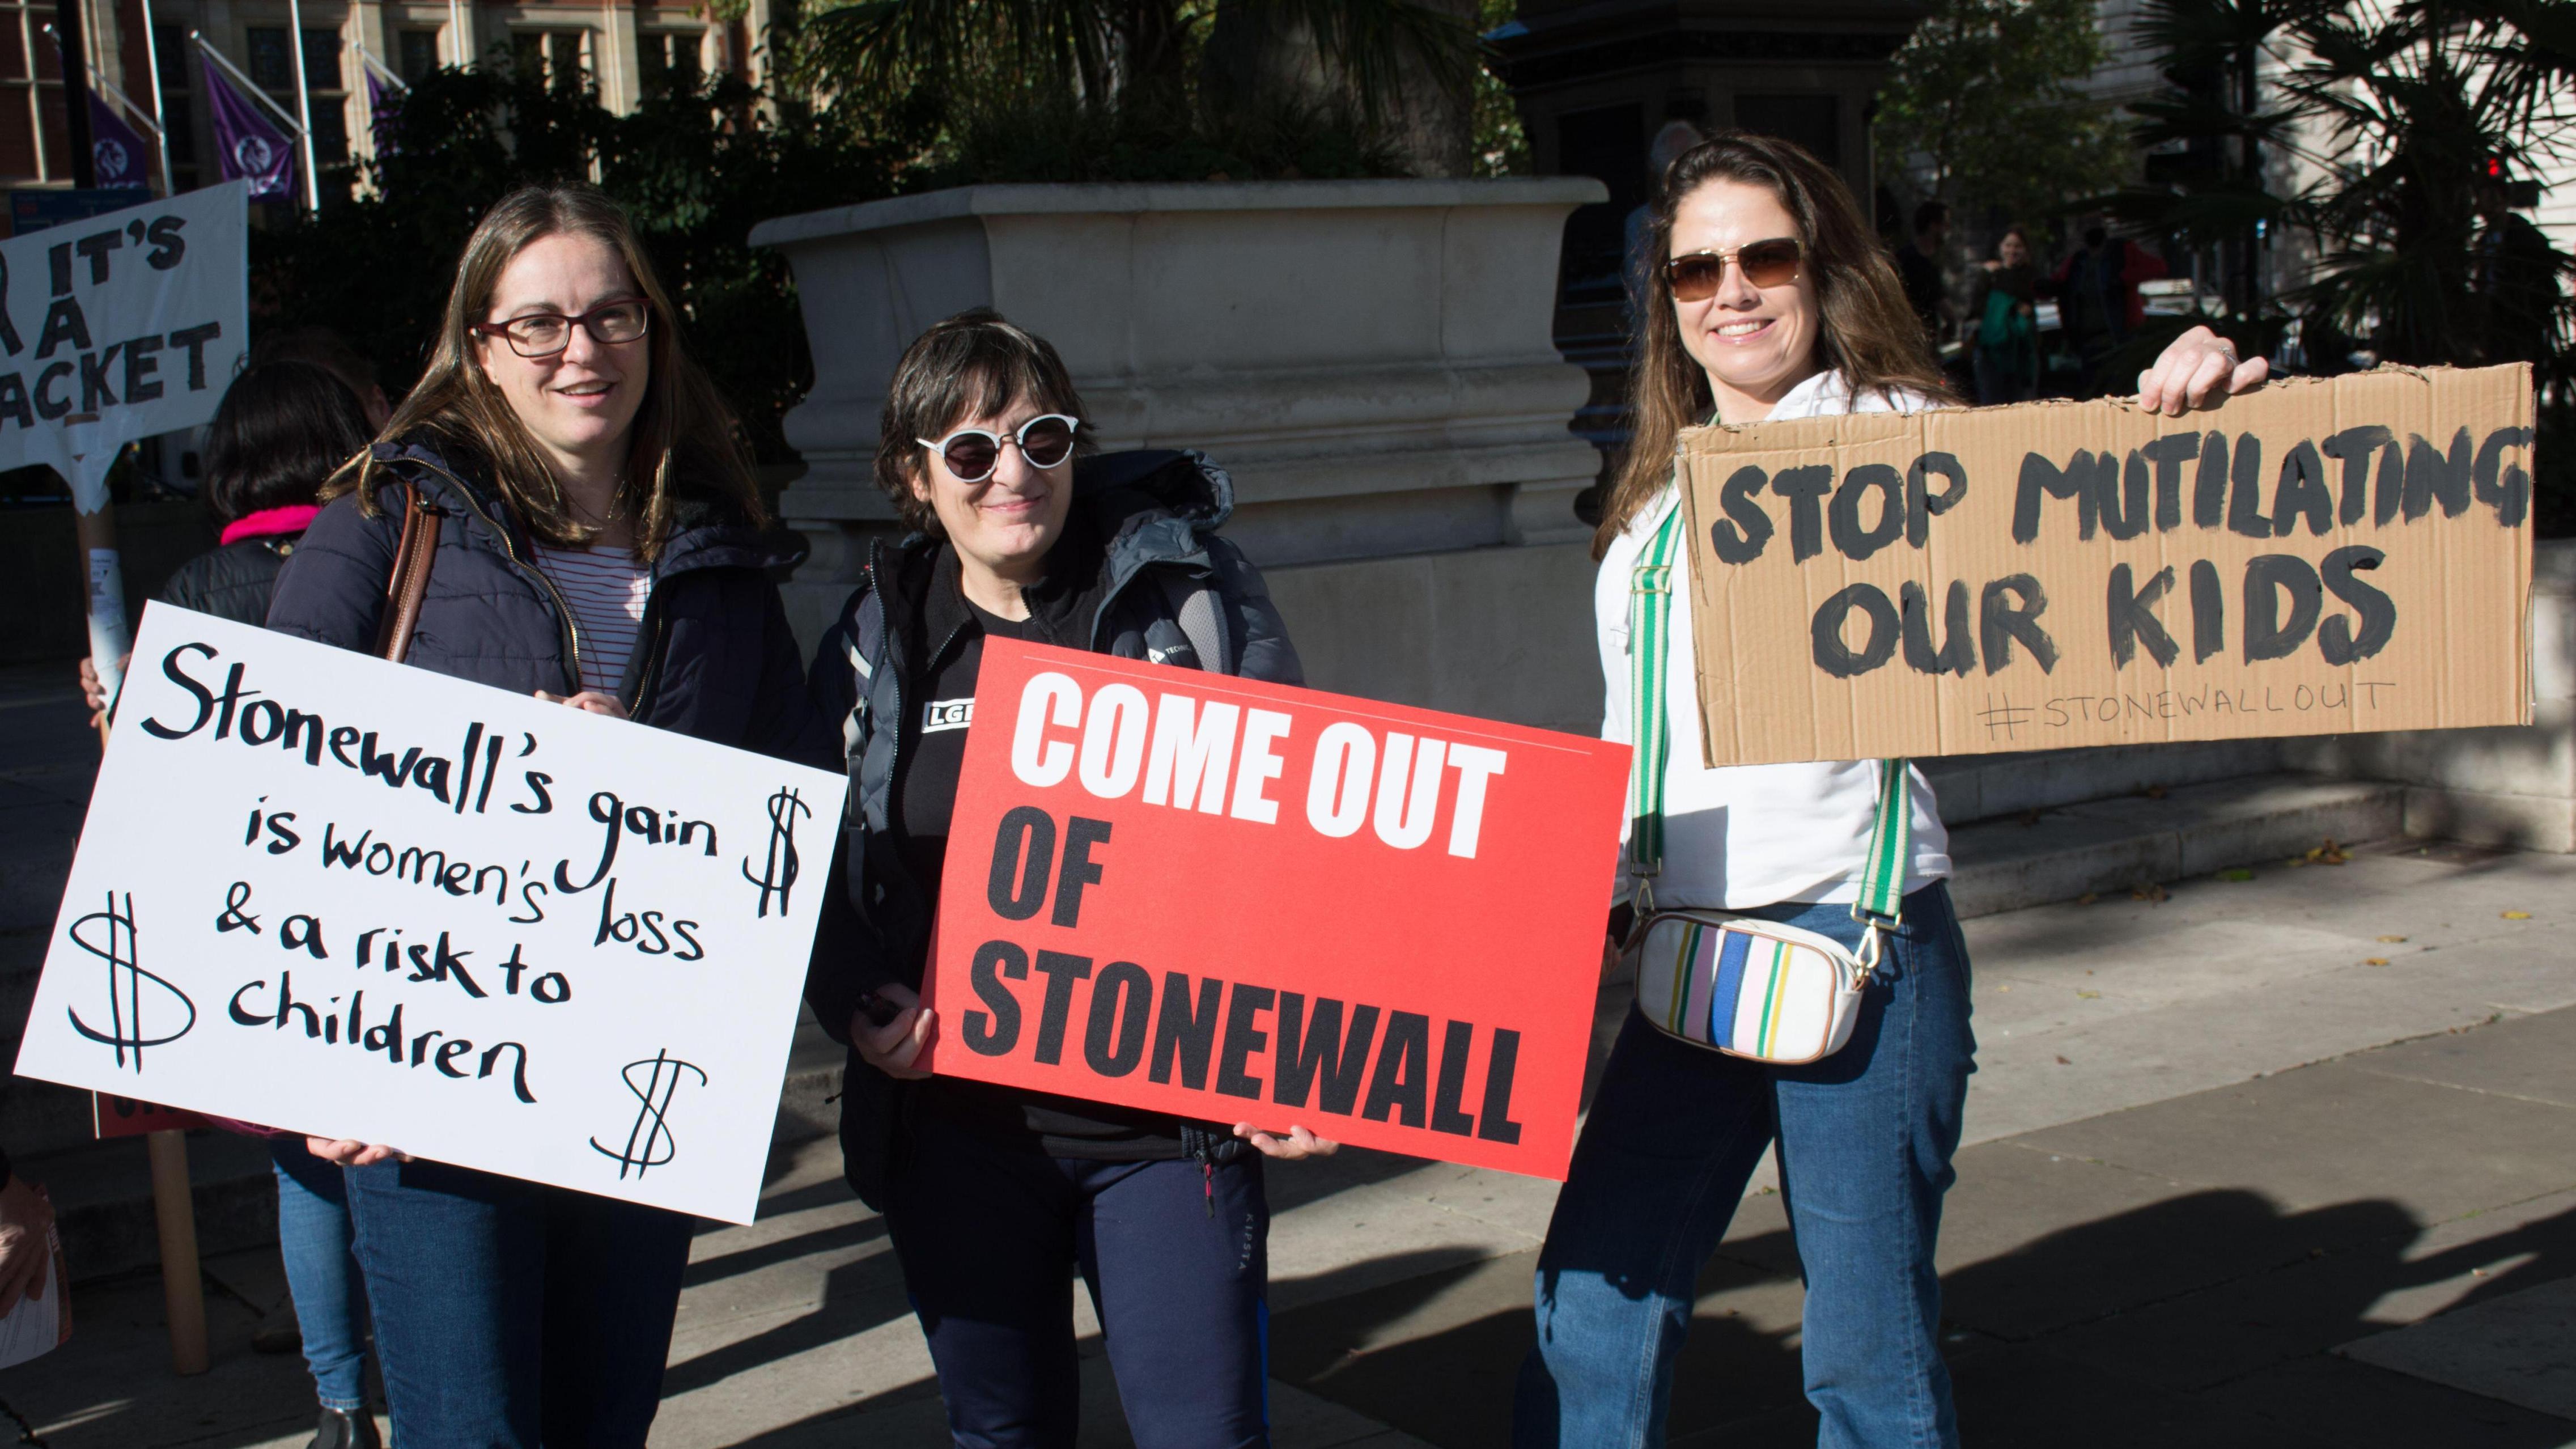 Stonewall tried to silence warnings of weak evidence for trans healthcare